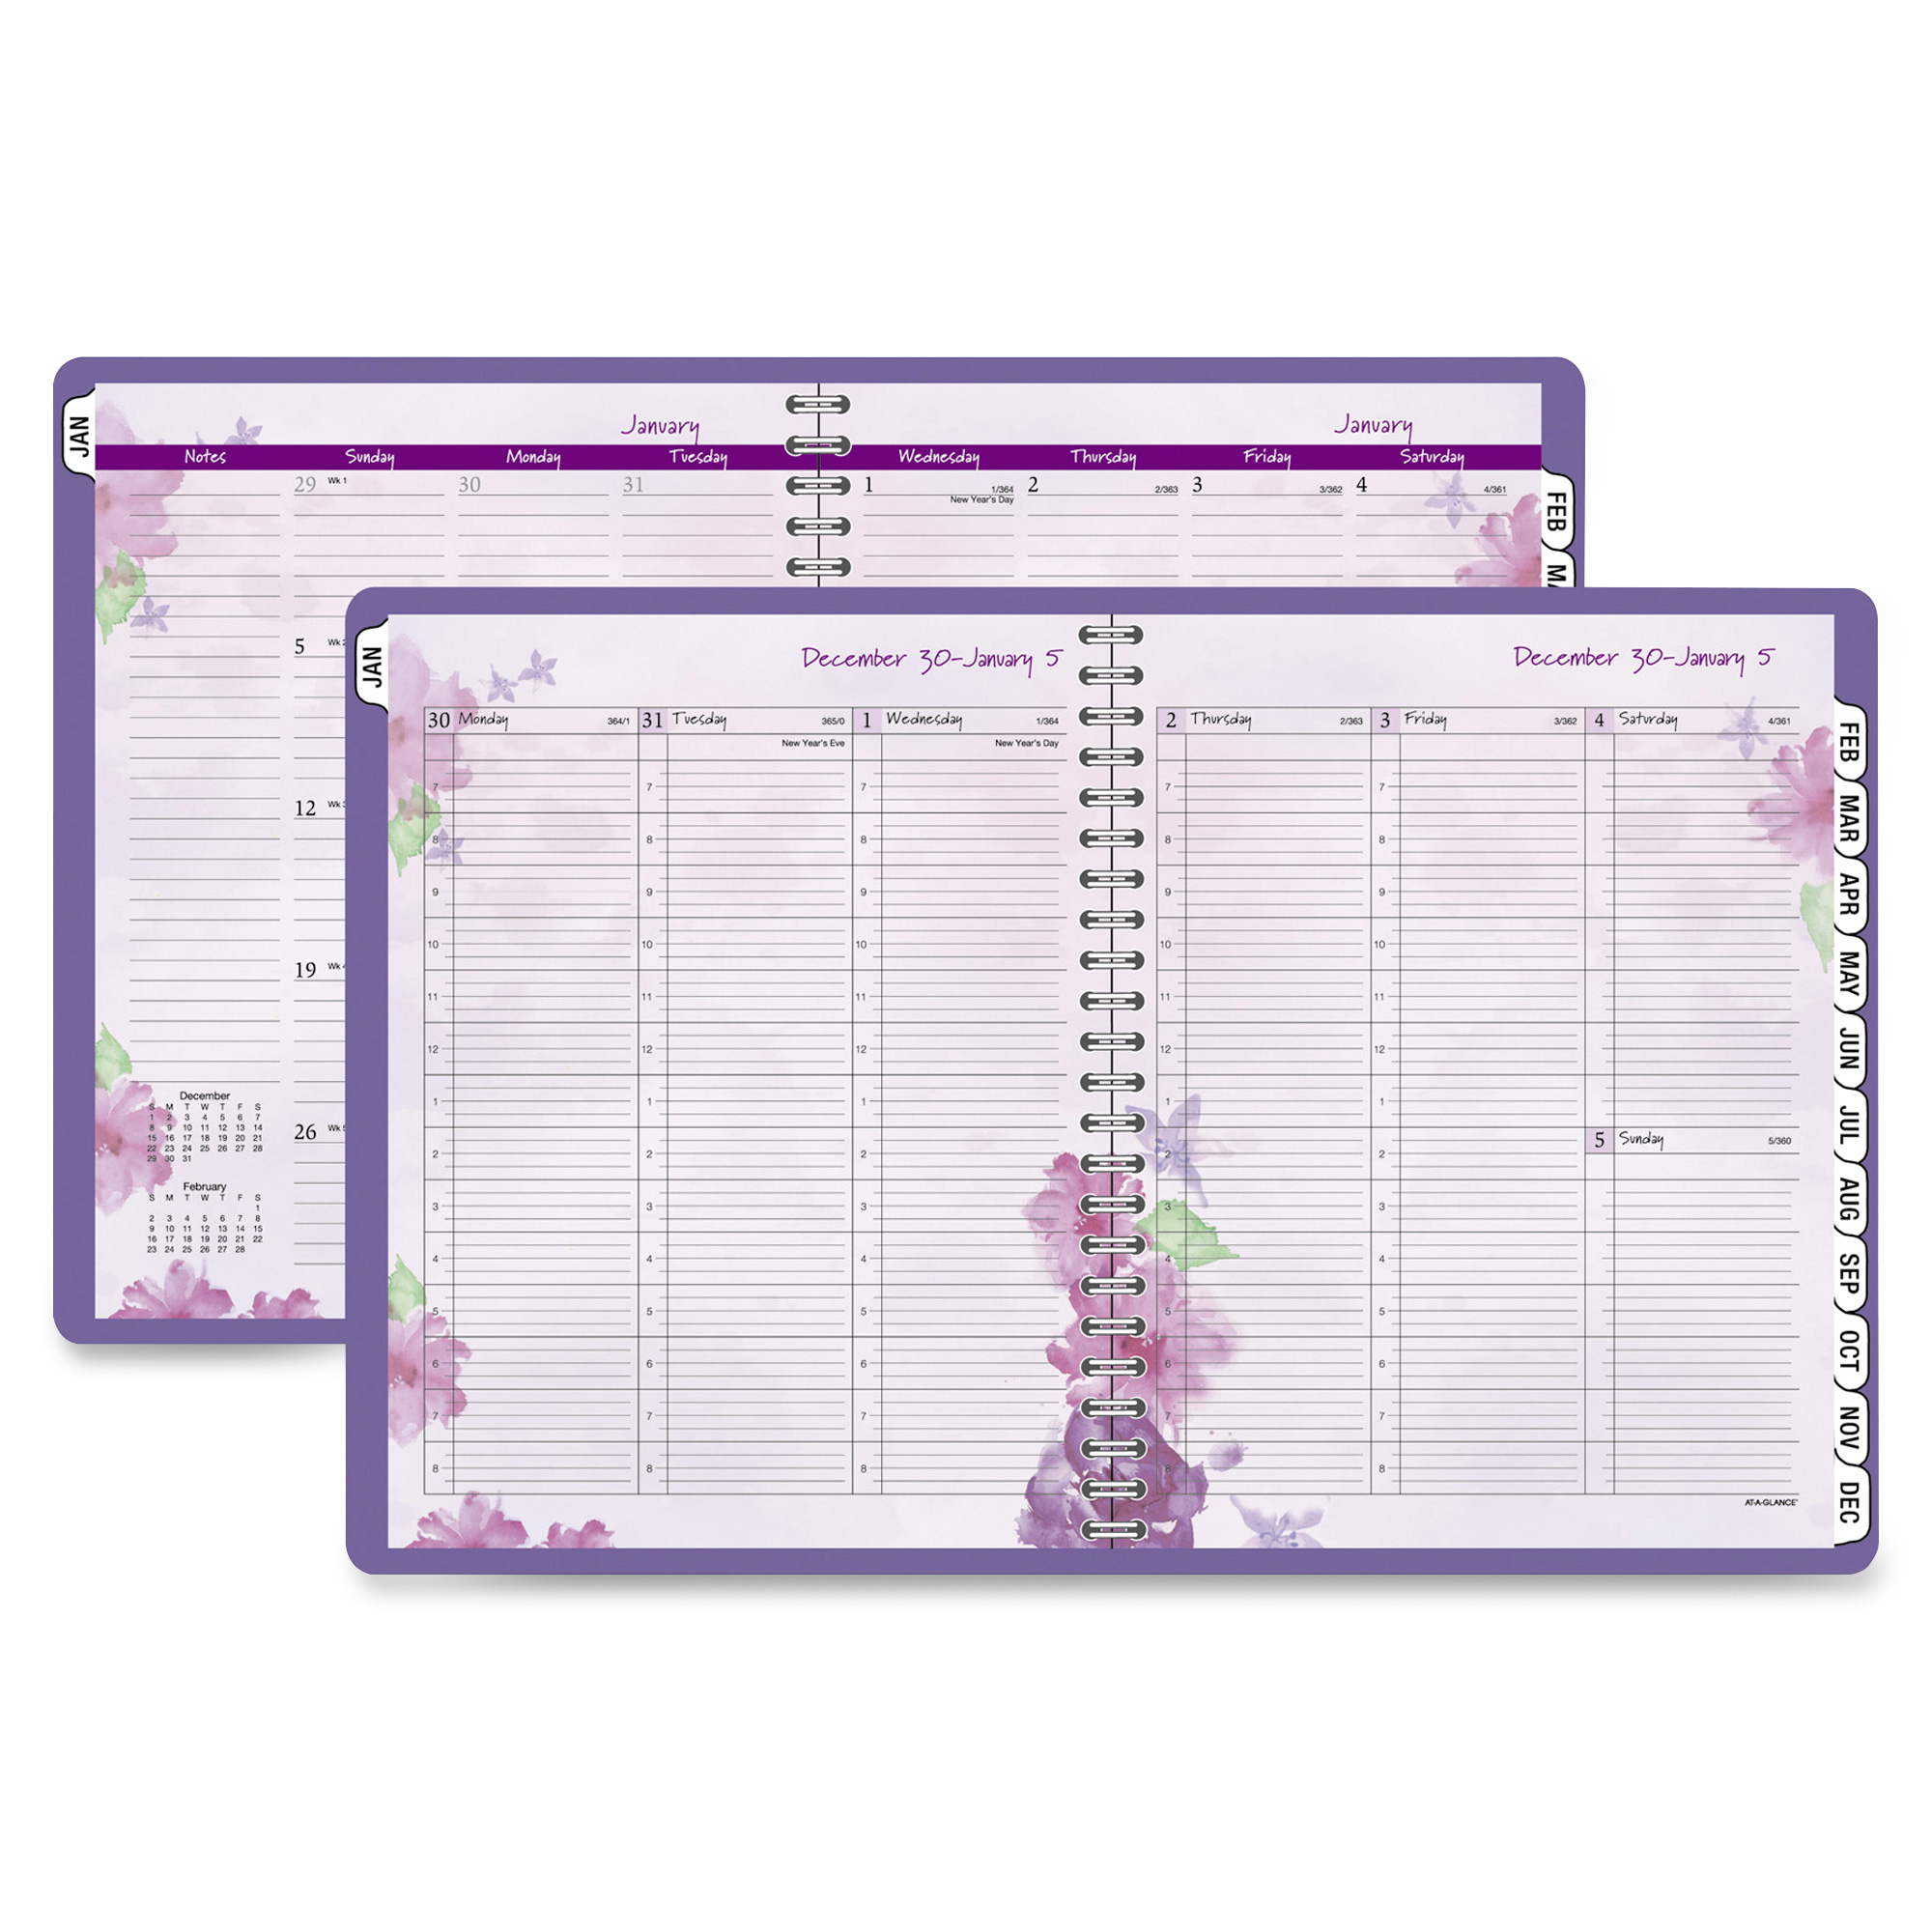 Daily Planner Printable - Beautiful Day Premium Professional